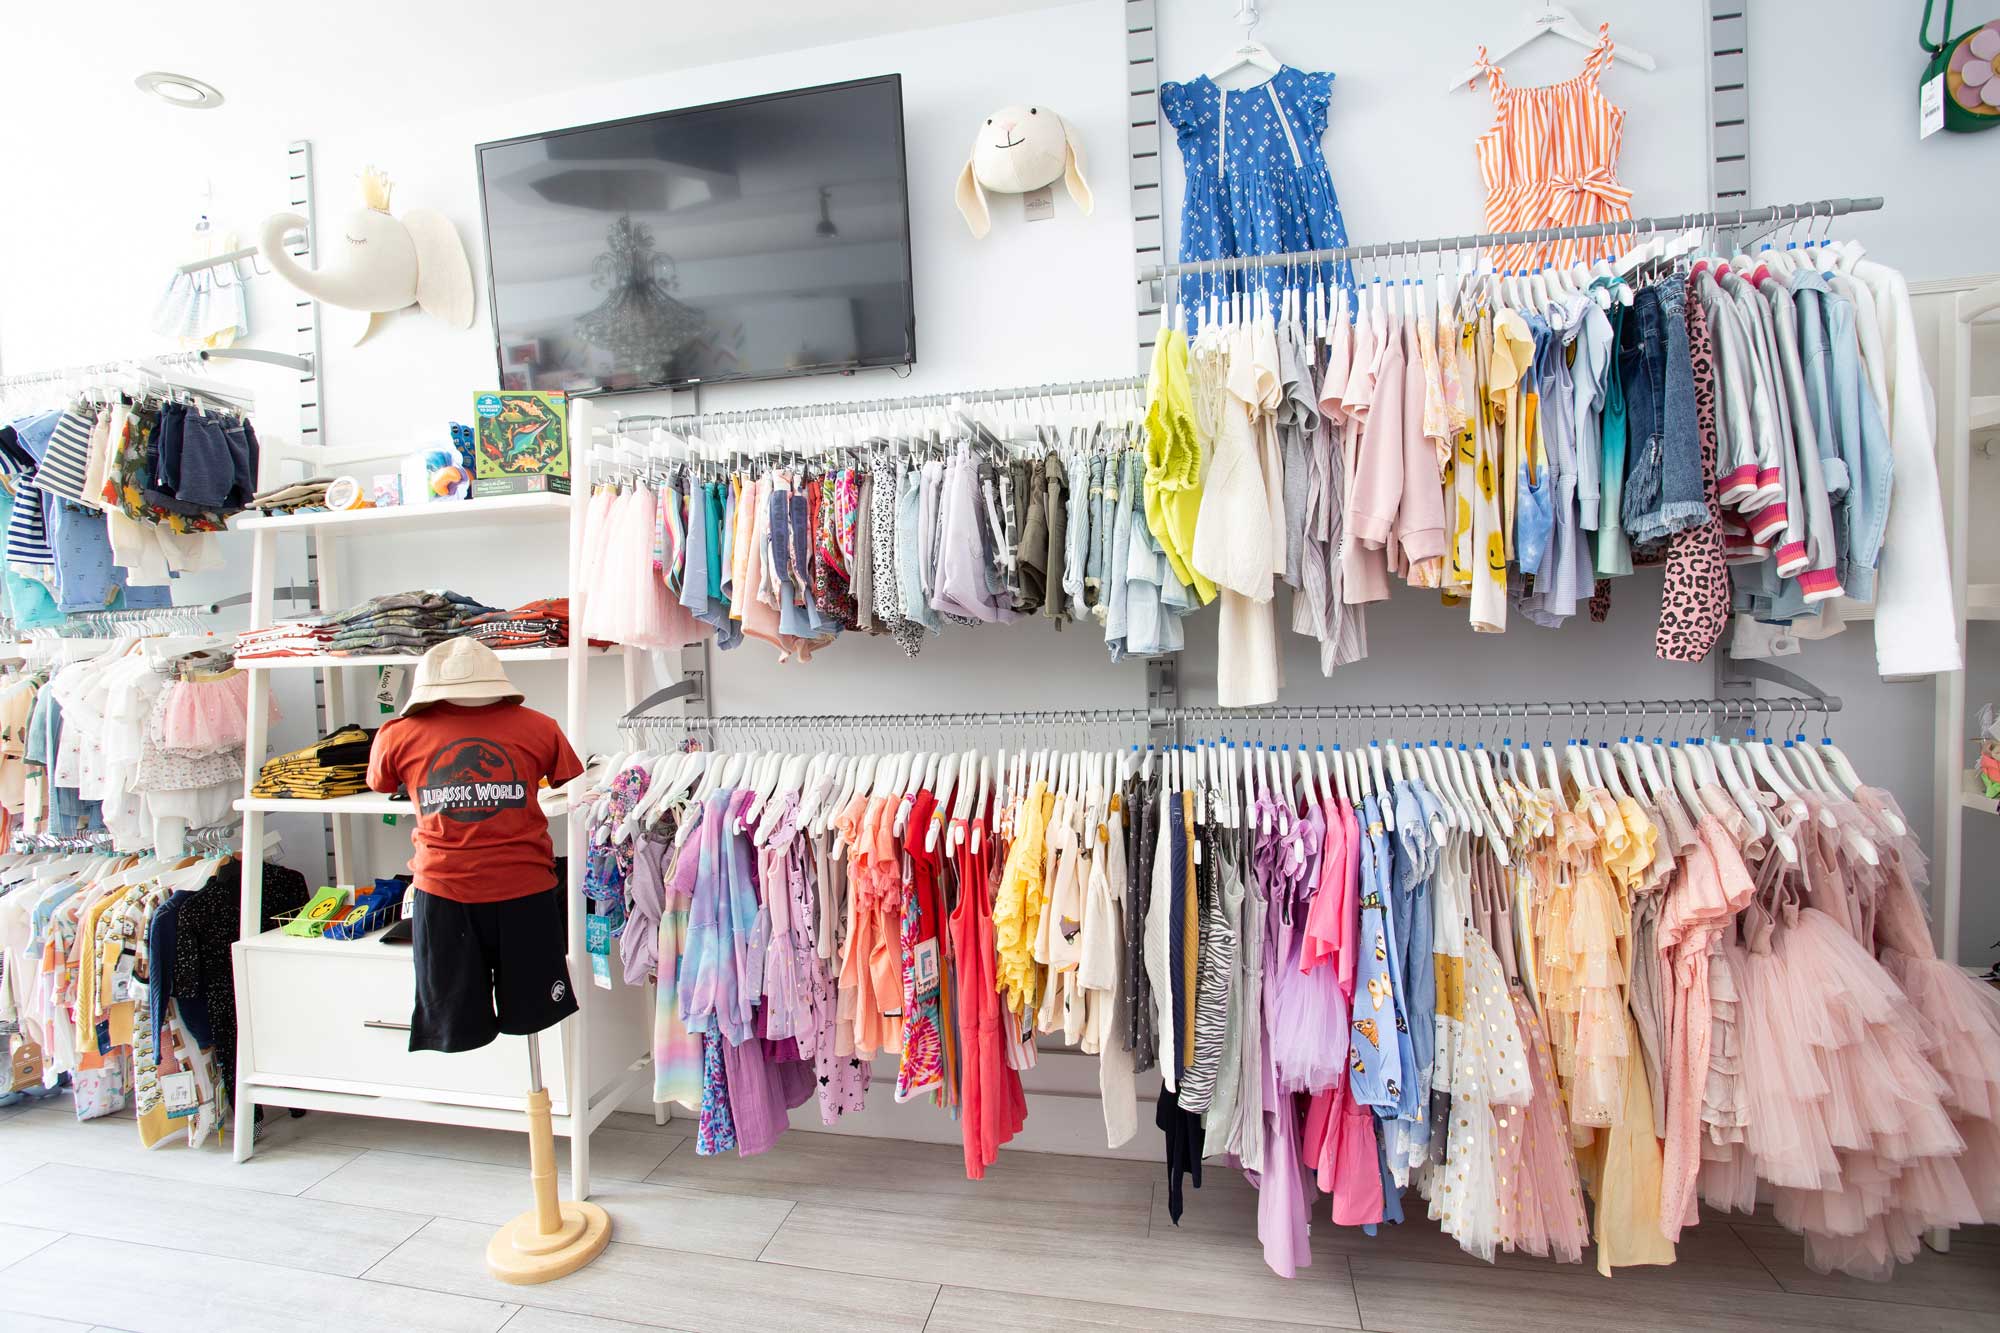 We stock thousands of baby and kids outfits. From summer dresses and swimsuits, to baby snowsuits and bunting. We have the accessories to complete the look including kids sunglasses and baby blankets, mittens, and hats.  